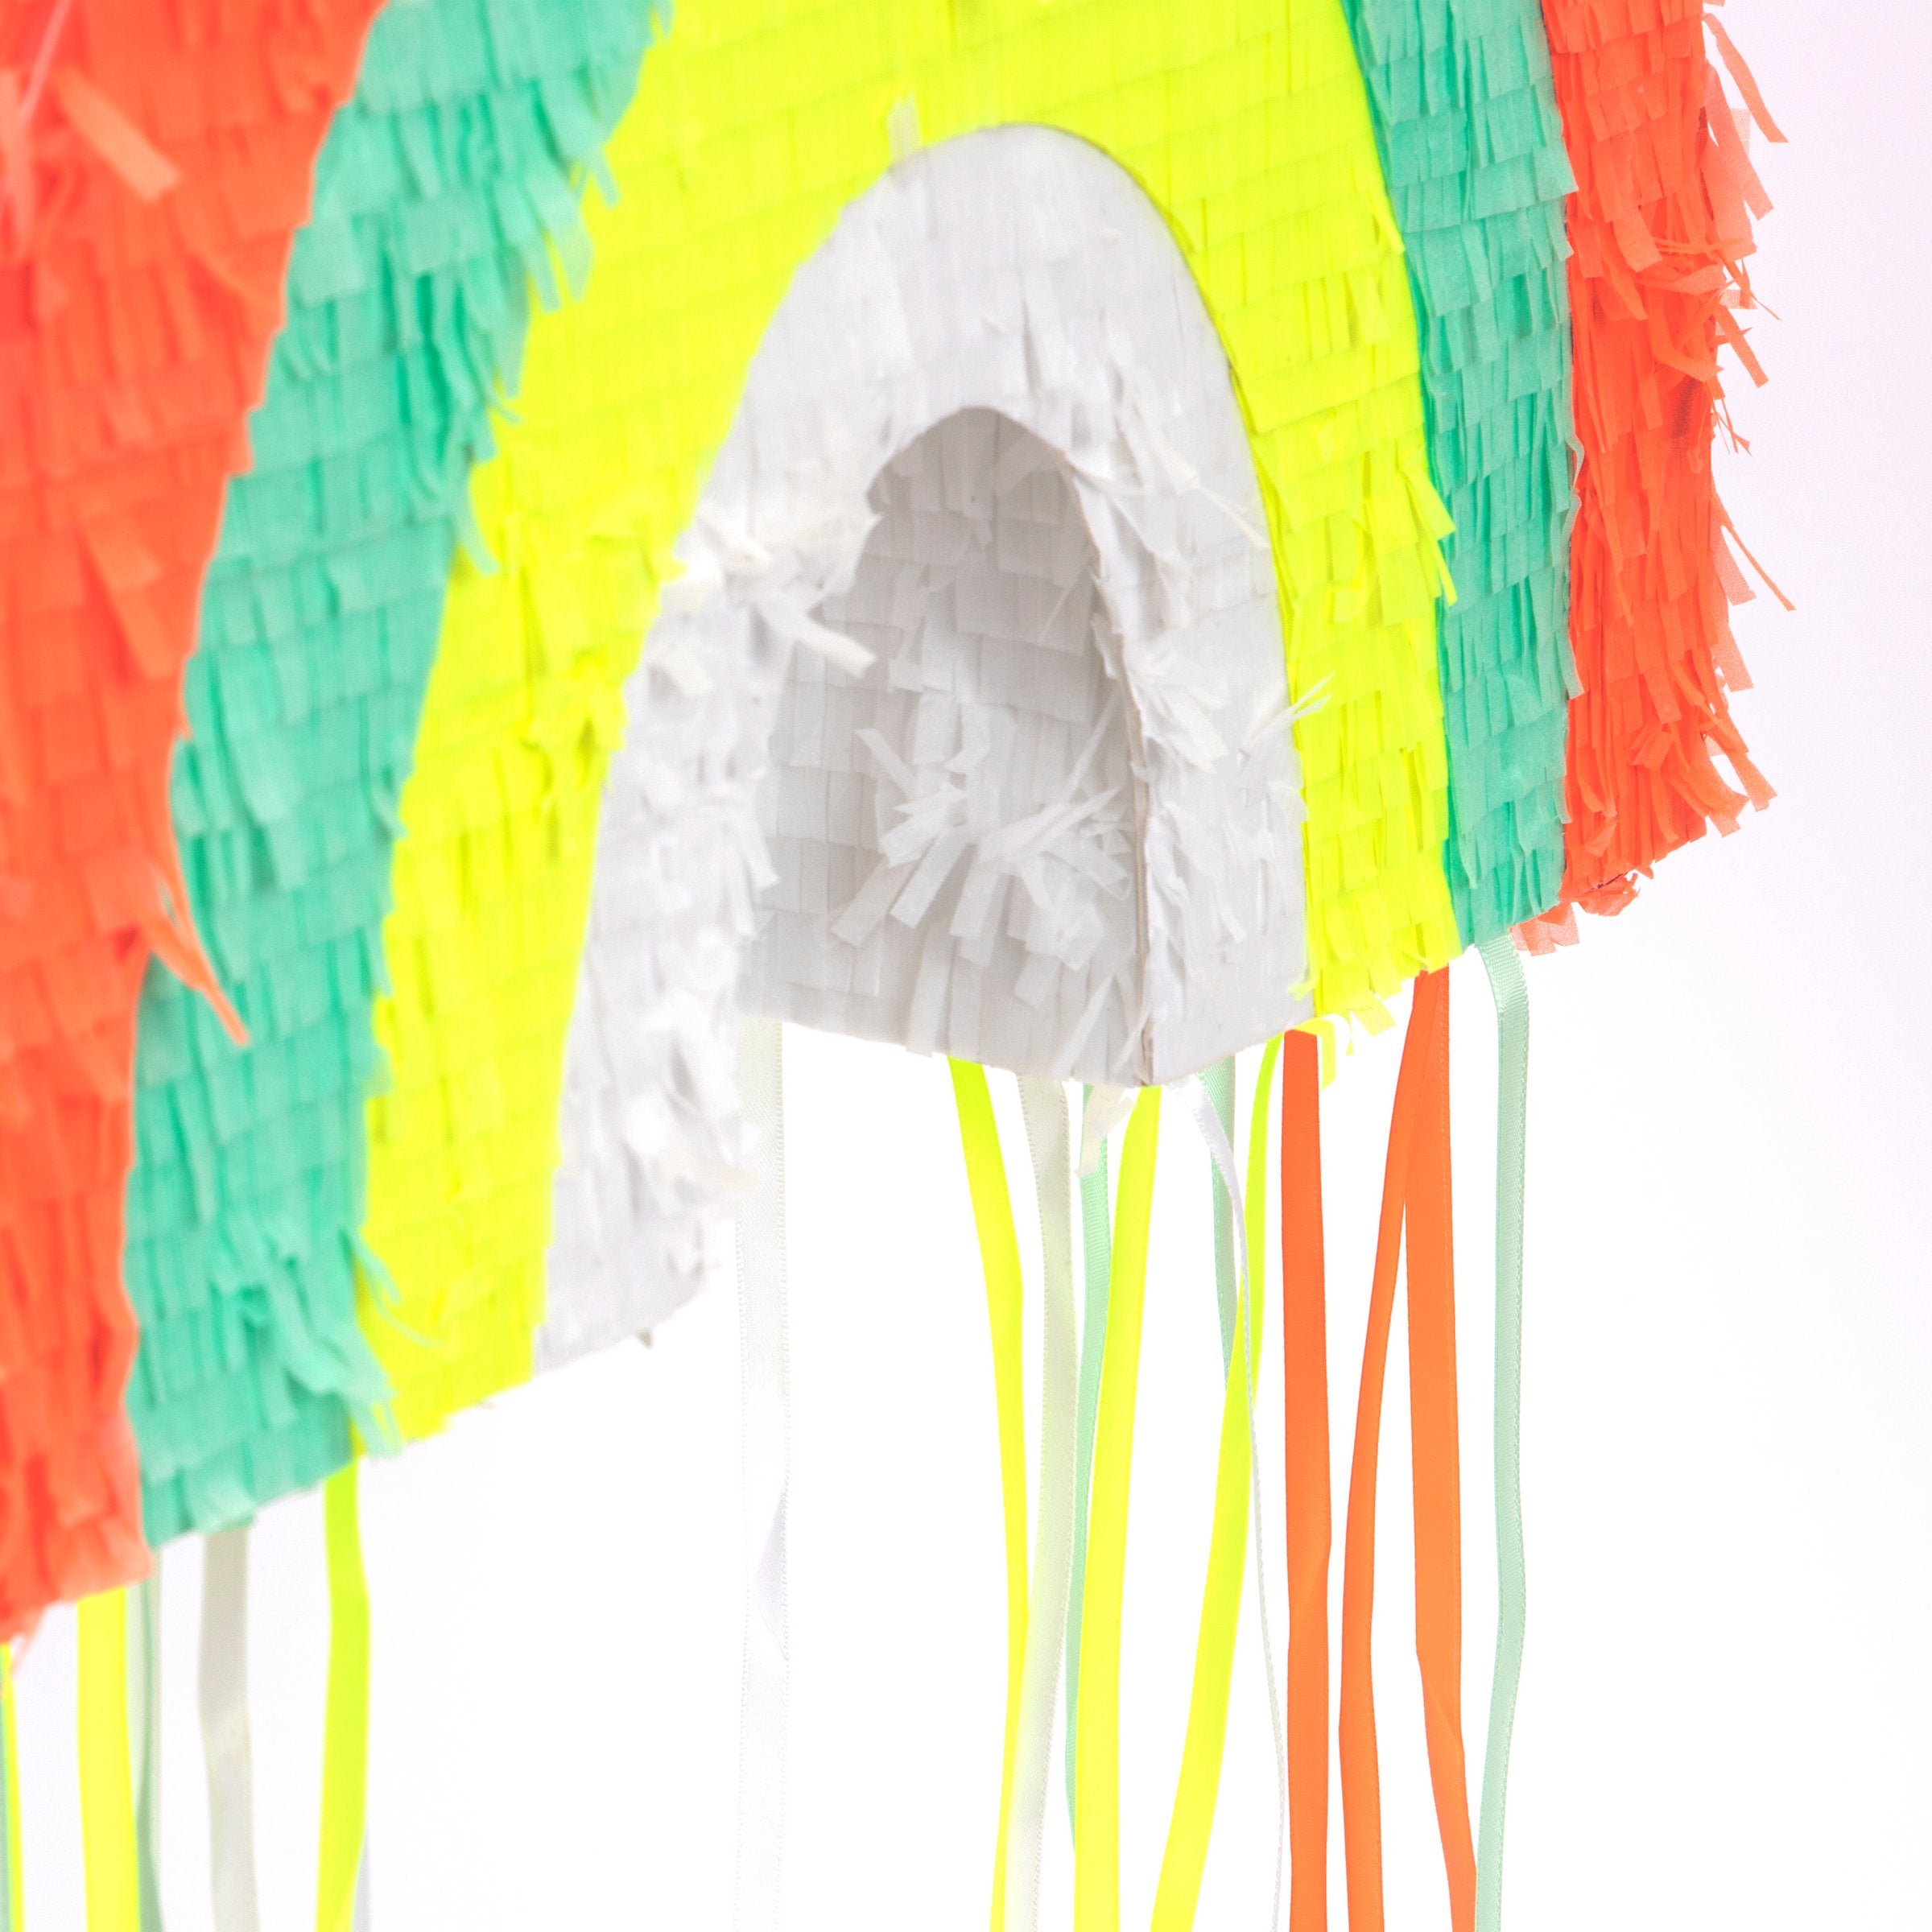 This rainbow pinata is beautifully decorated with colorful stripes and hanging ribbons.